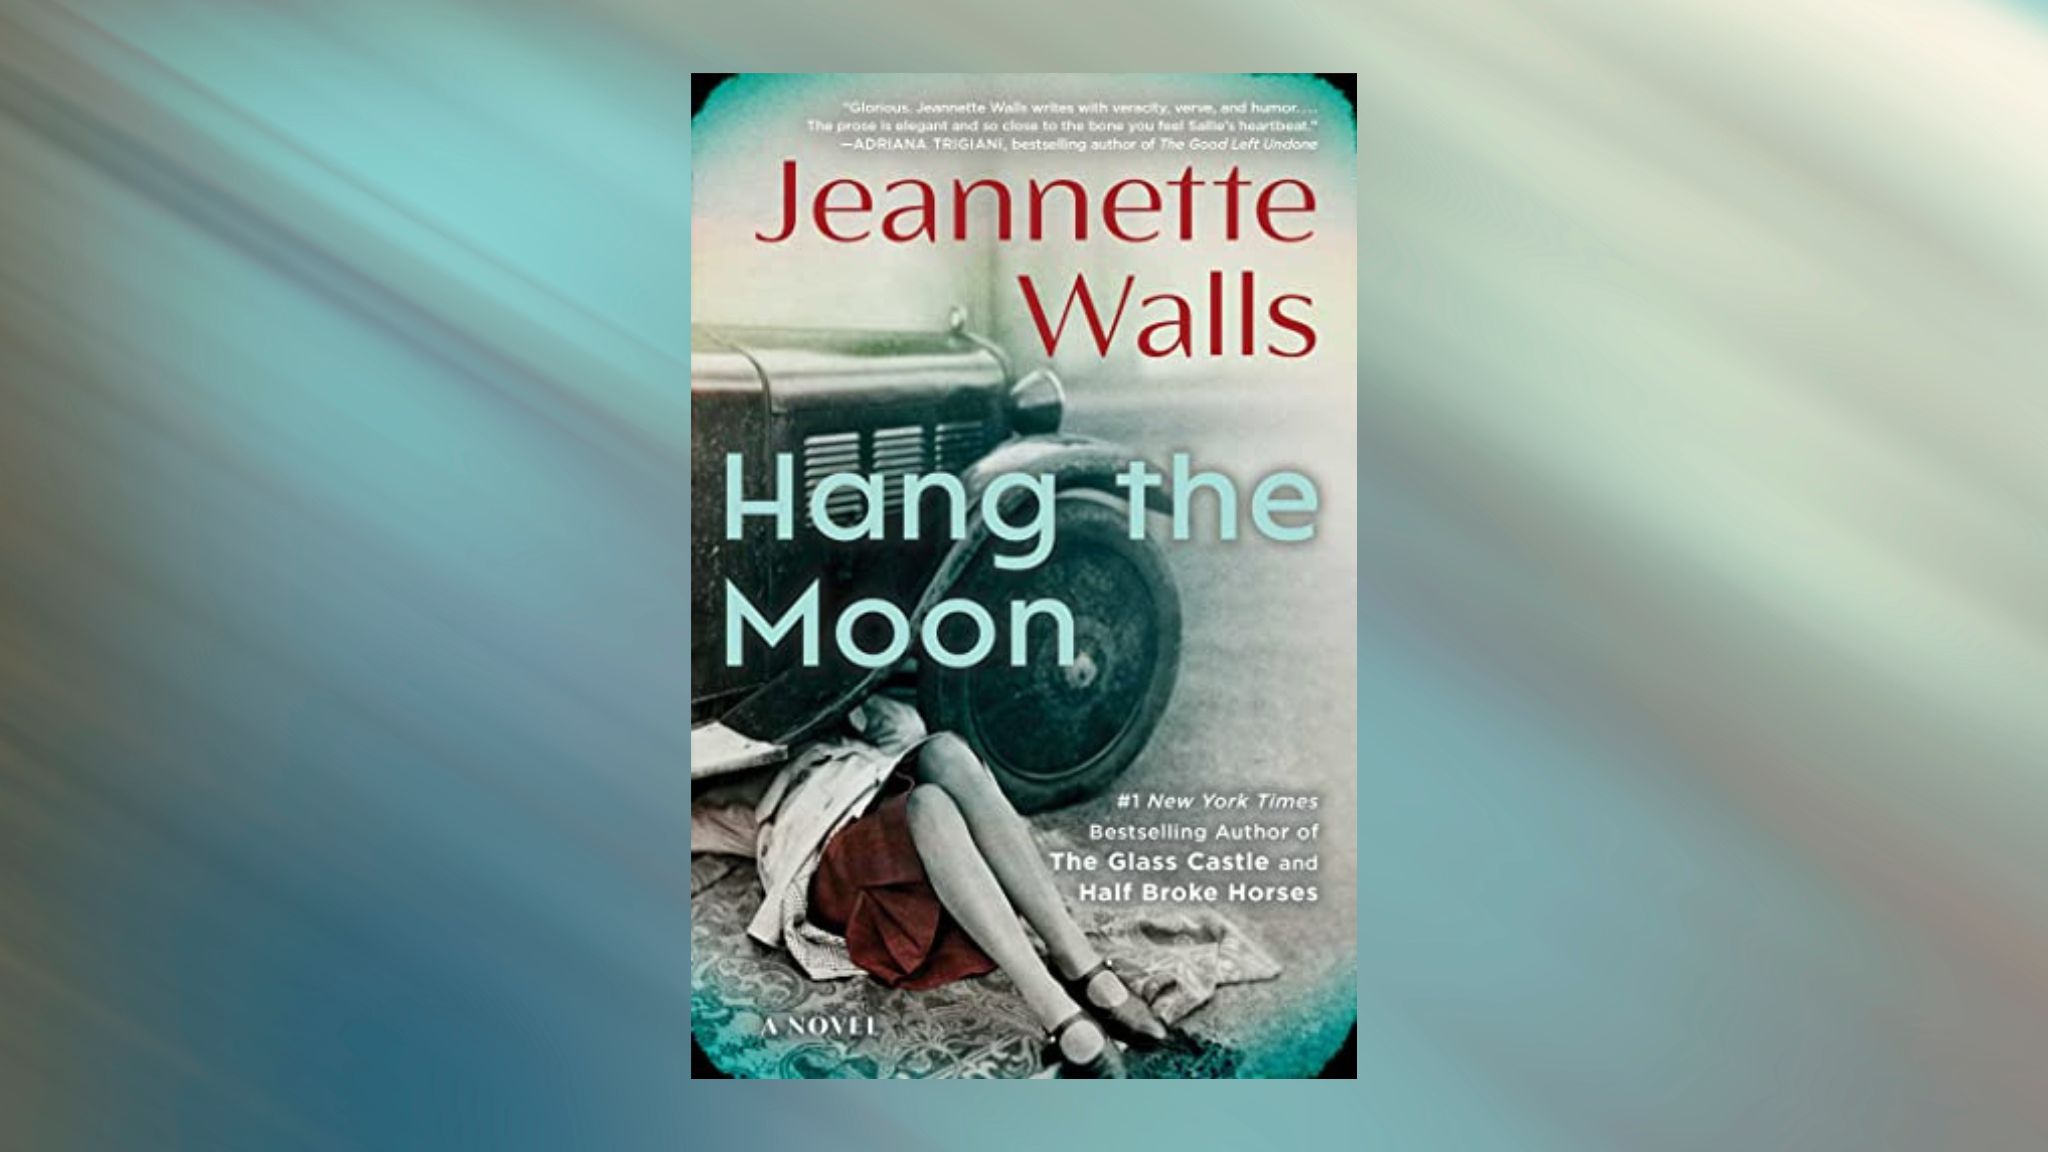 Hang the Moon by Jeannette Walls